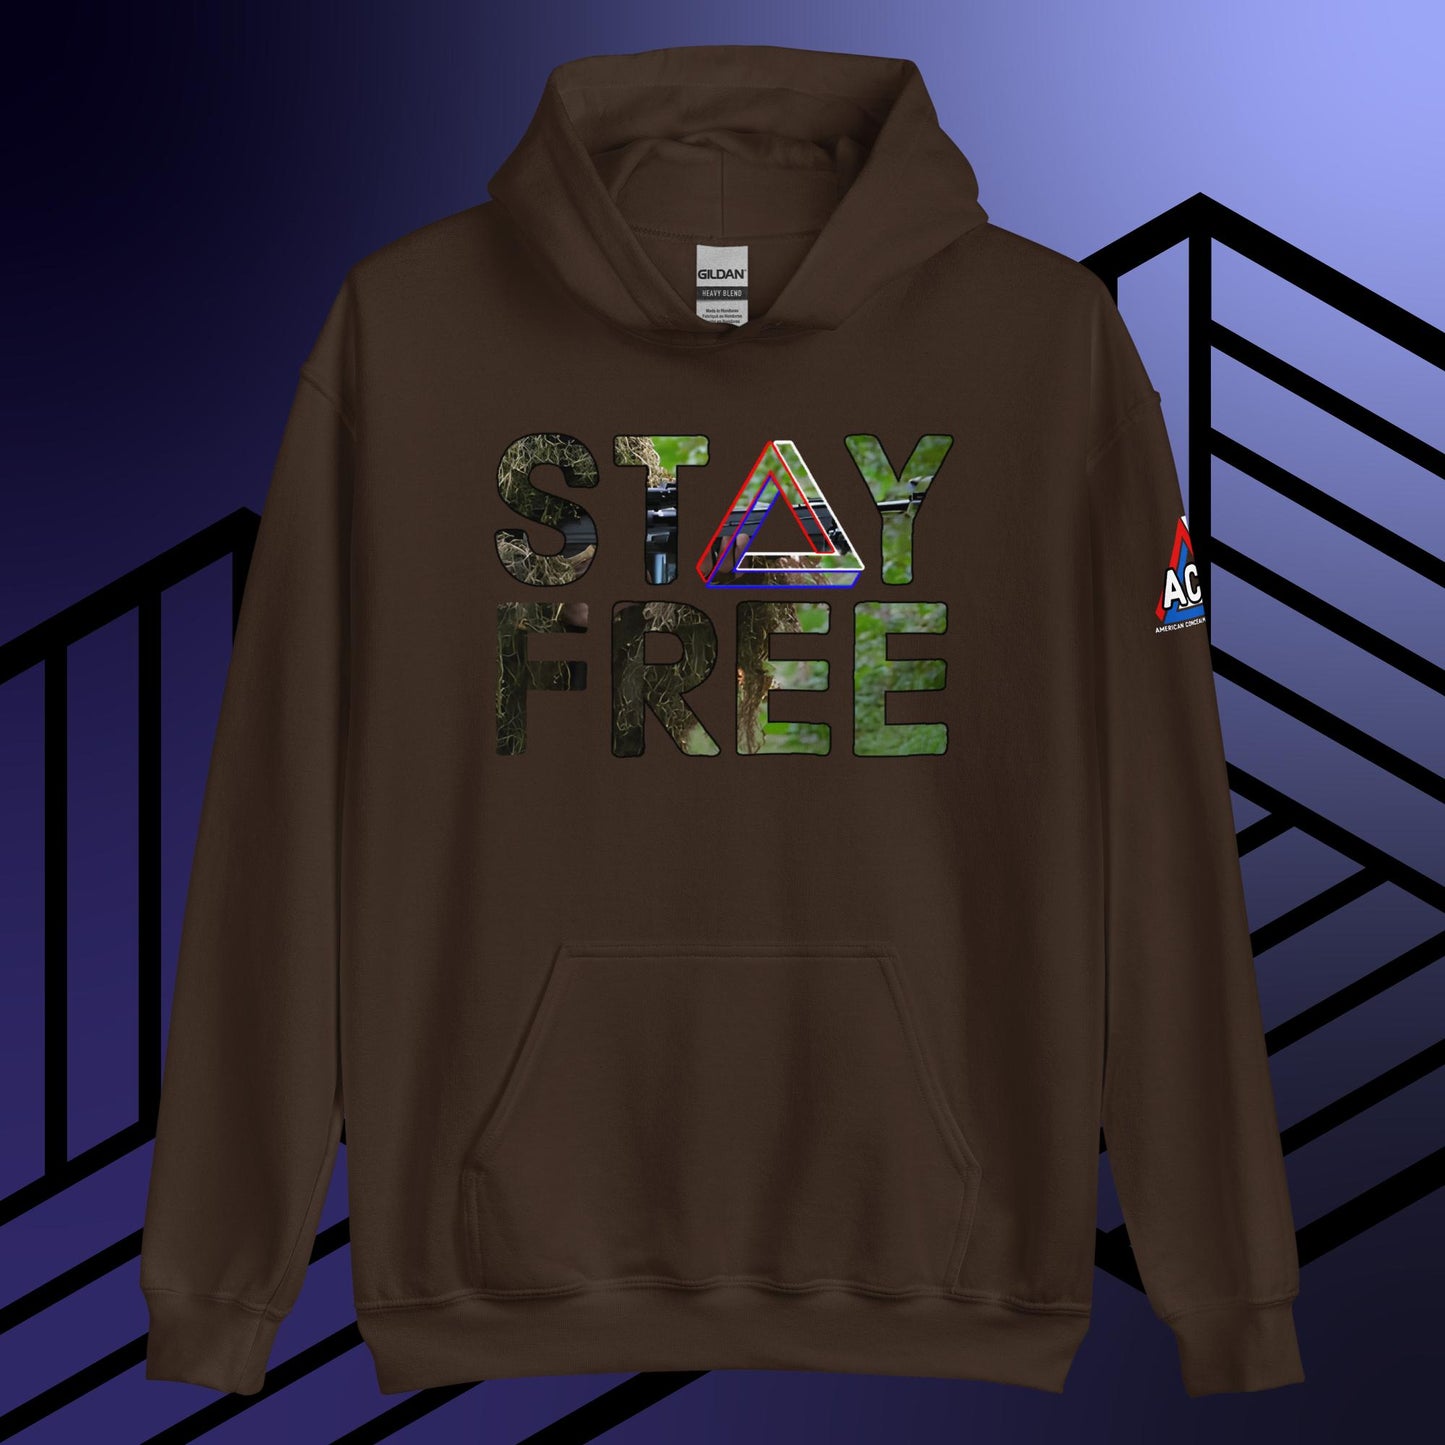 ACS STAY FREE GHILLIE HOODIE